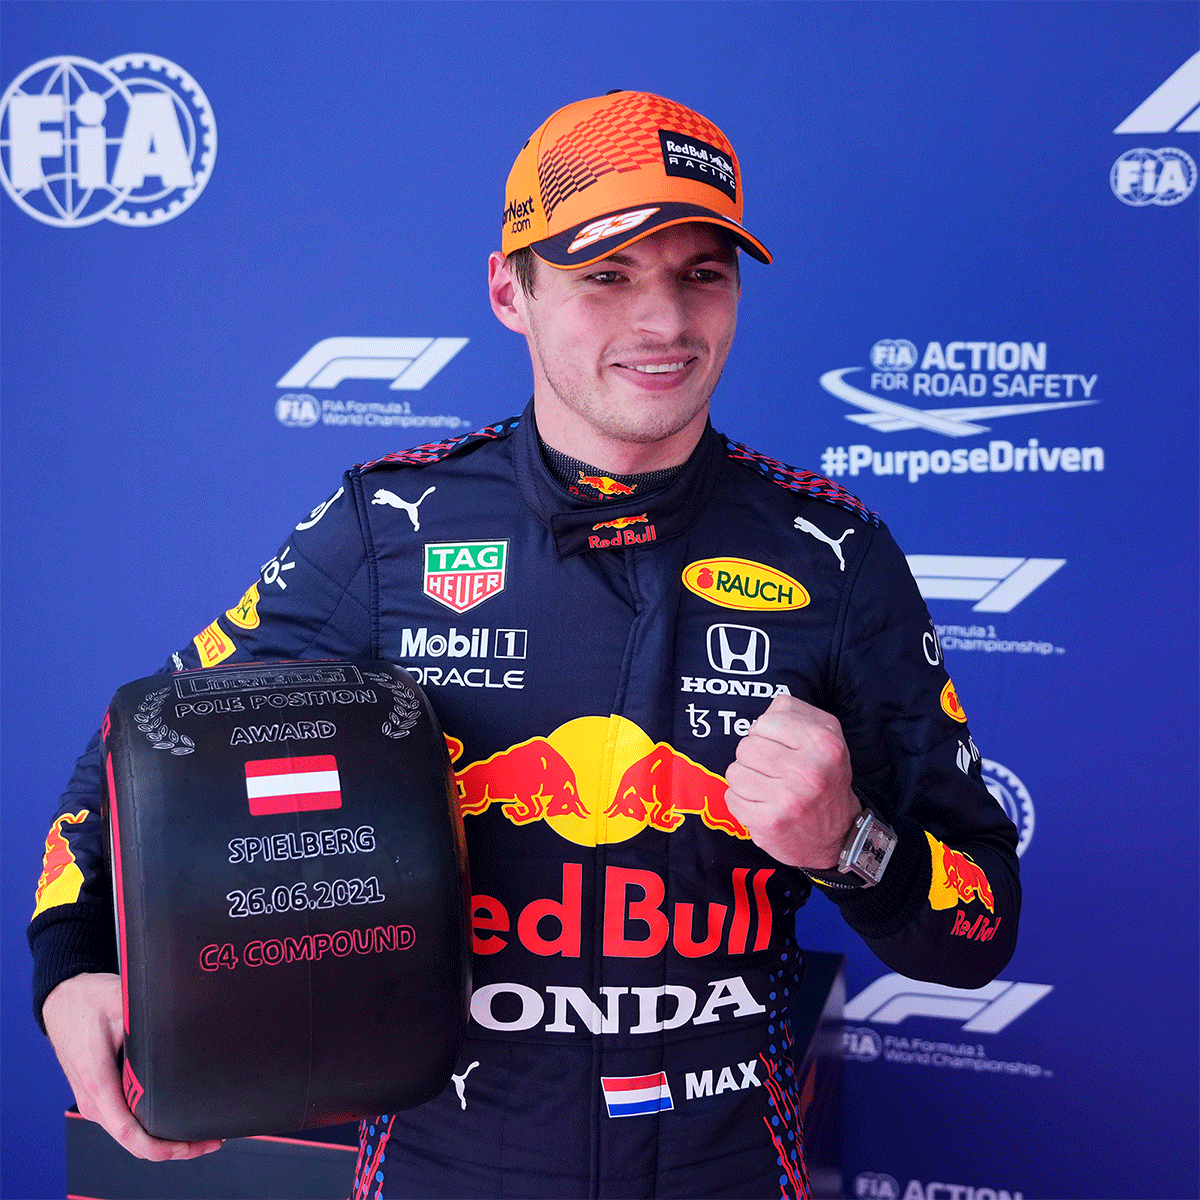 Max Verstappen celebrates on the podium after finishing taking pole position at the Styrian Grand Prix qualifying on Saturday